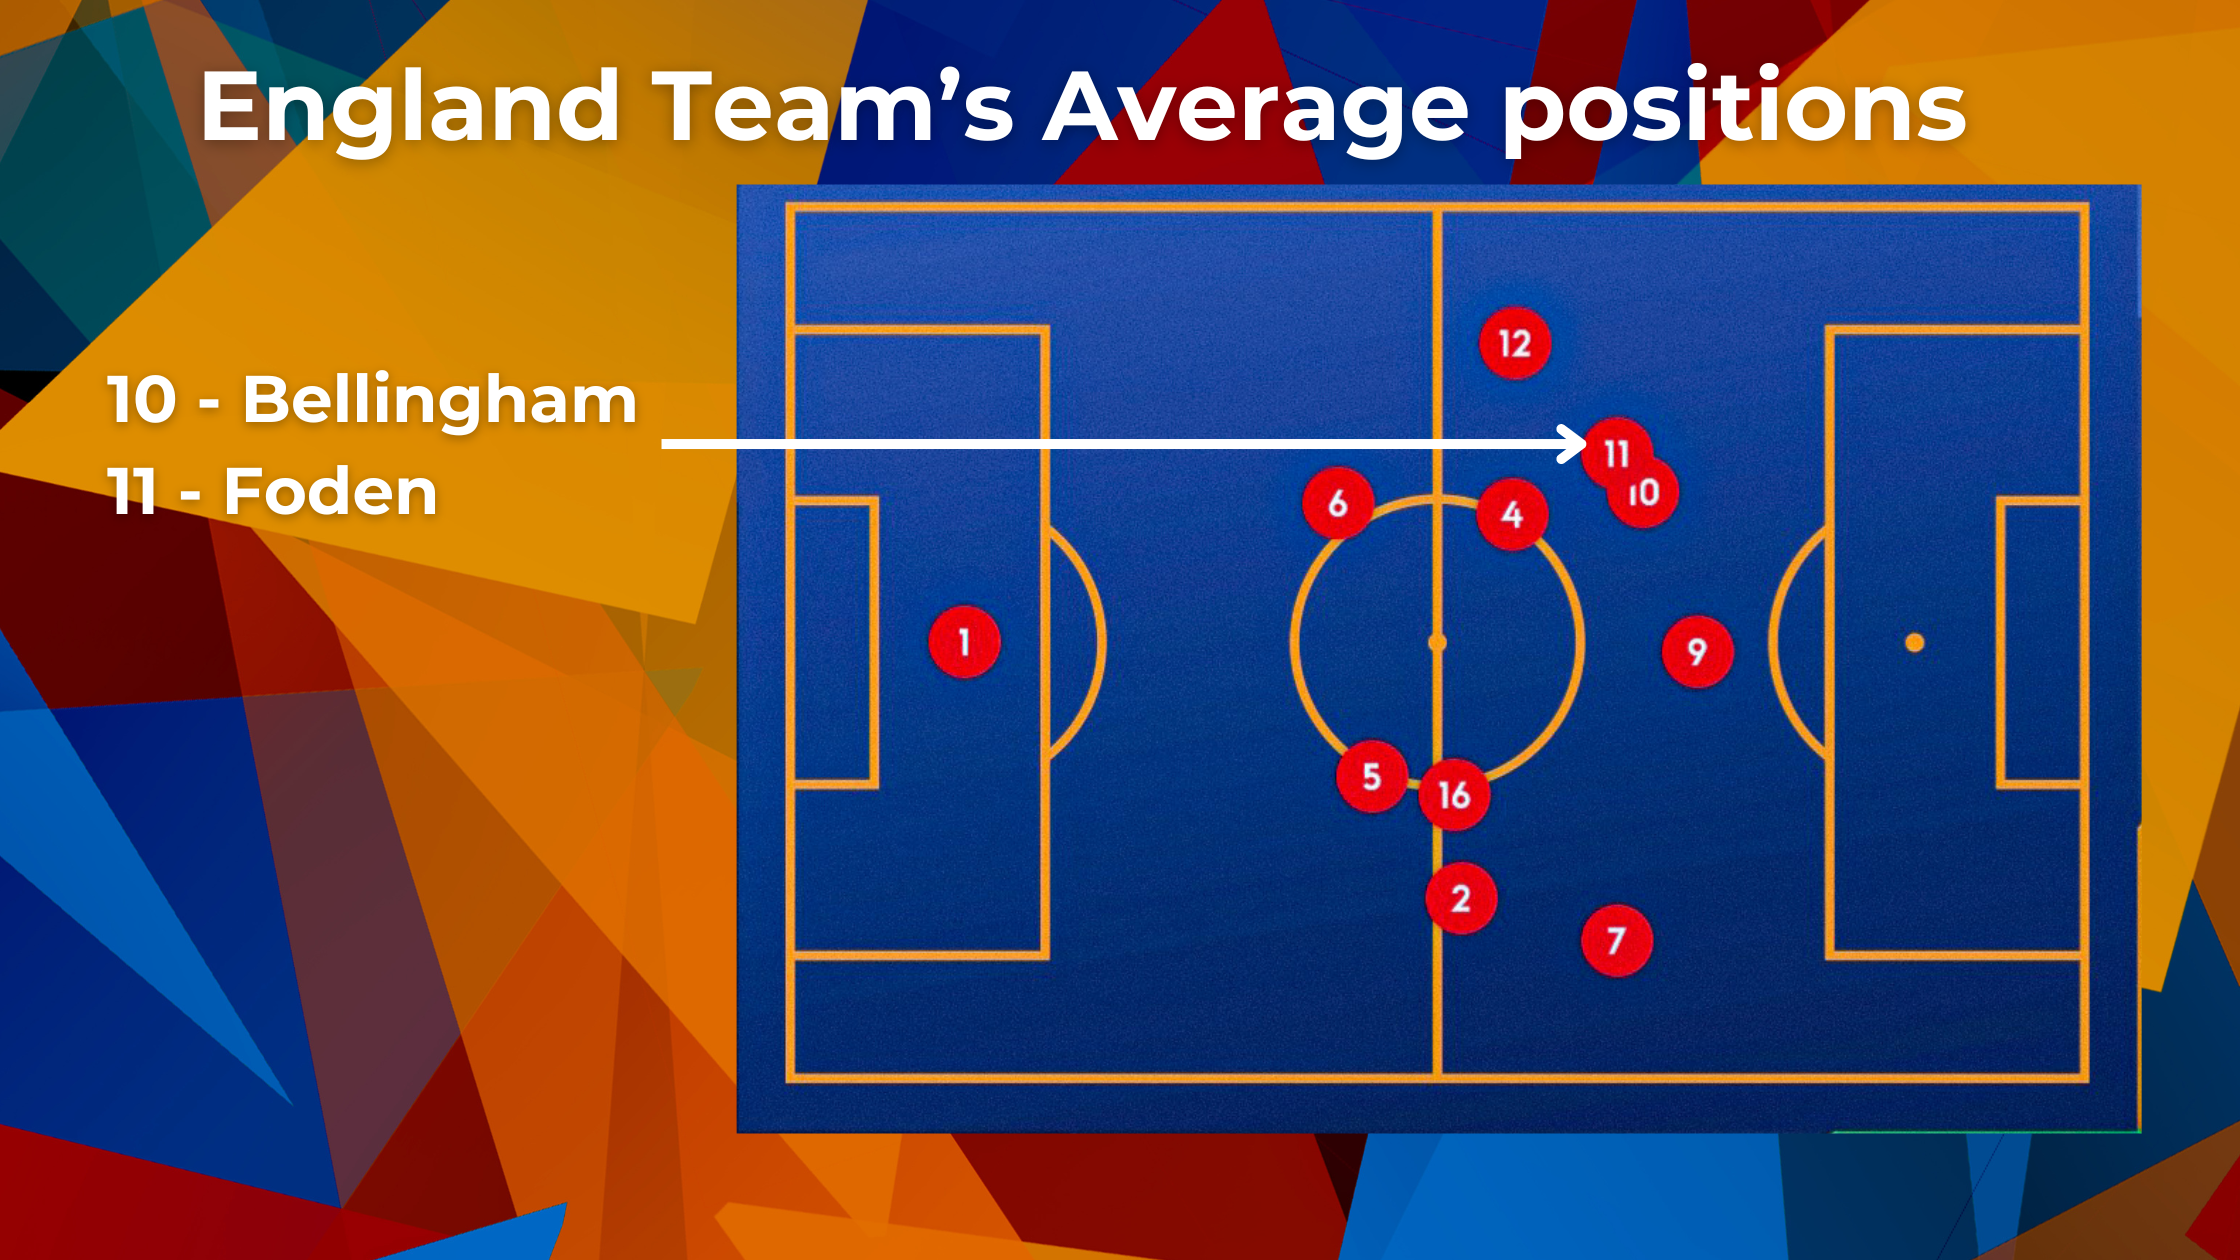 England Teams Average positions in England vs Slovenia - WTX News Breaking News, fashion & Culture from around the World - Daily News Briefings -Finance, Business, Politics & Sports News